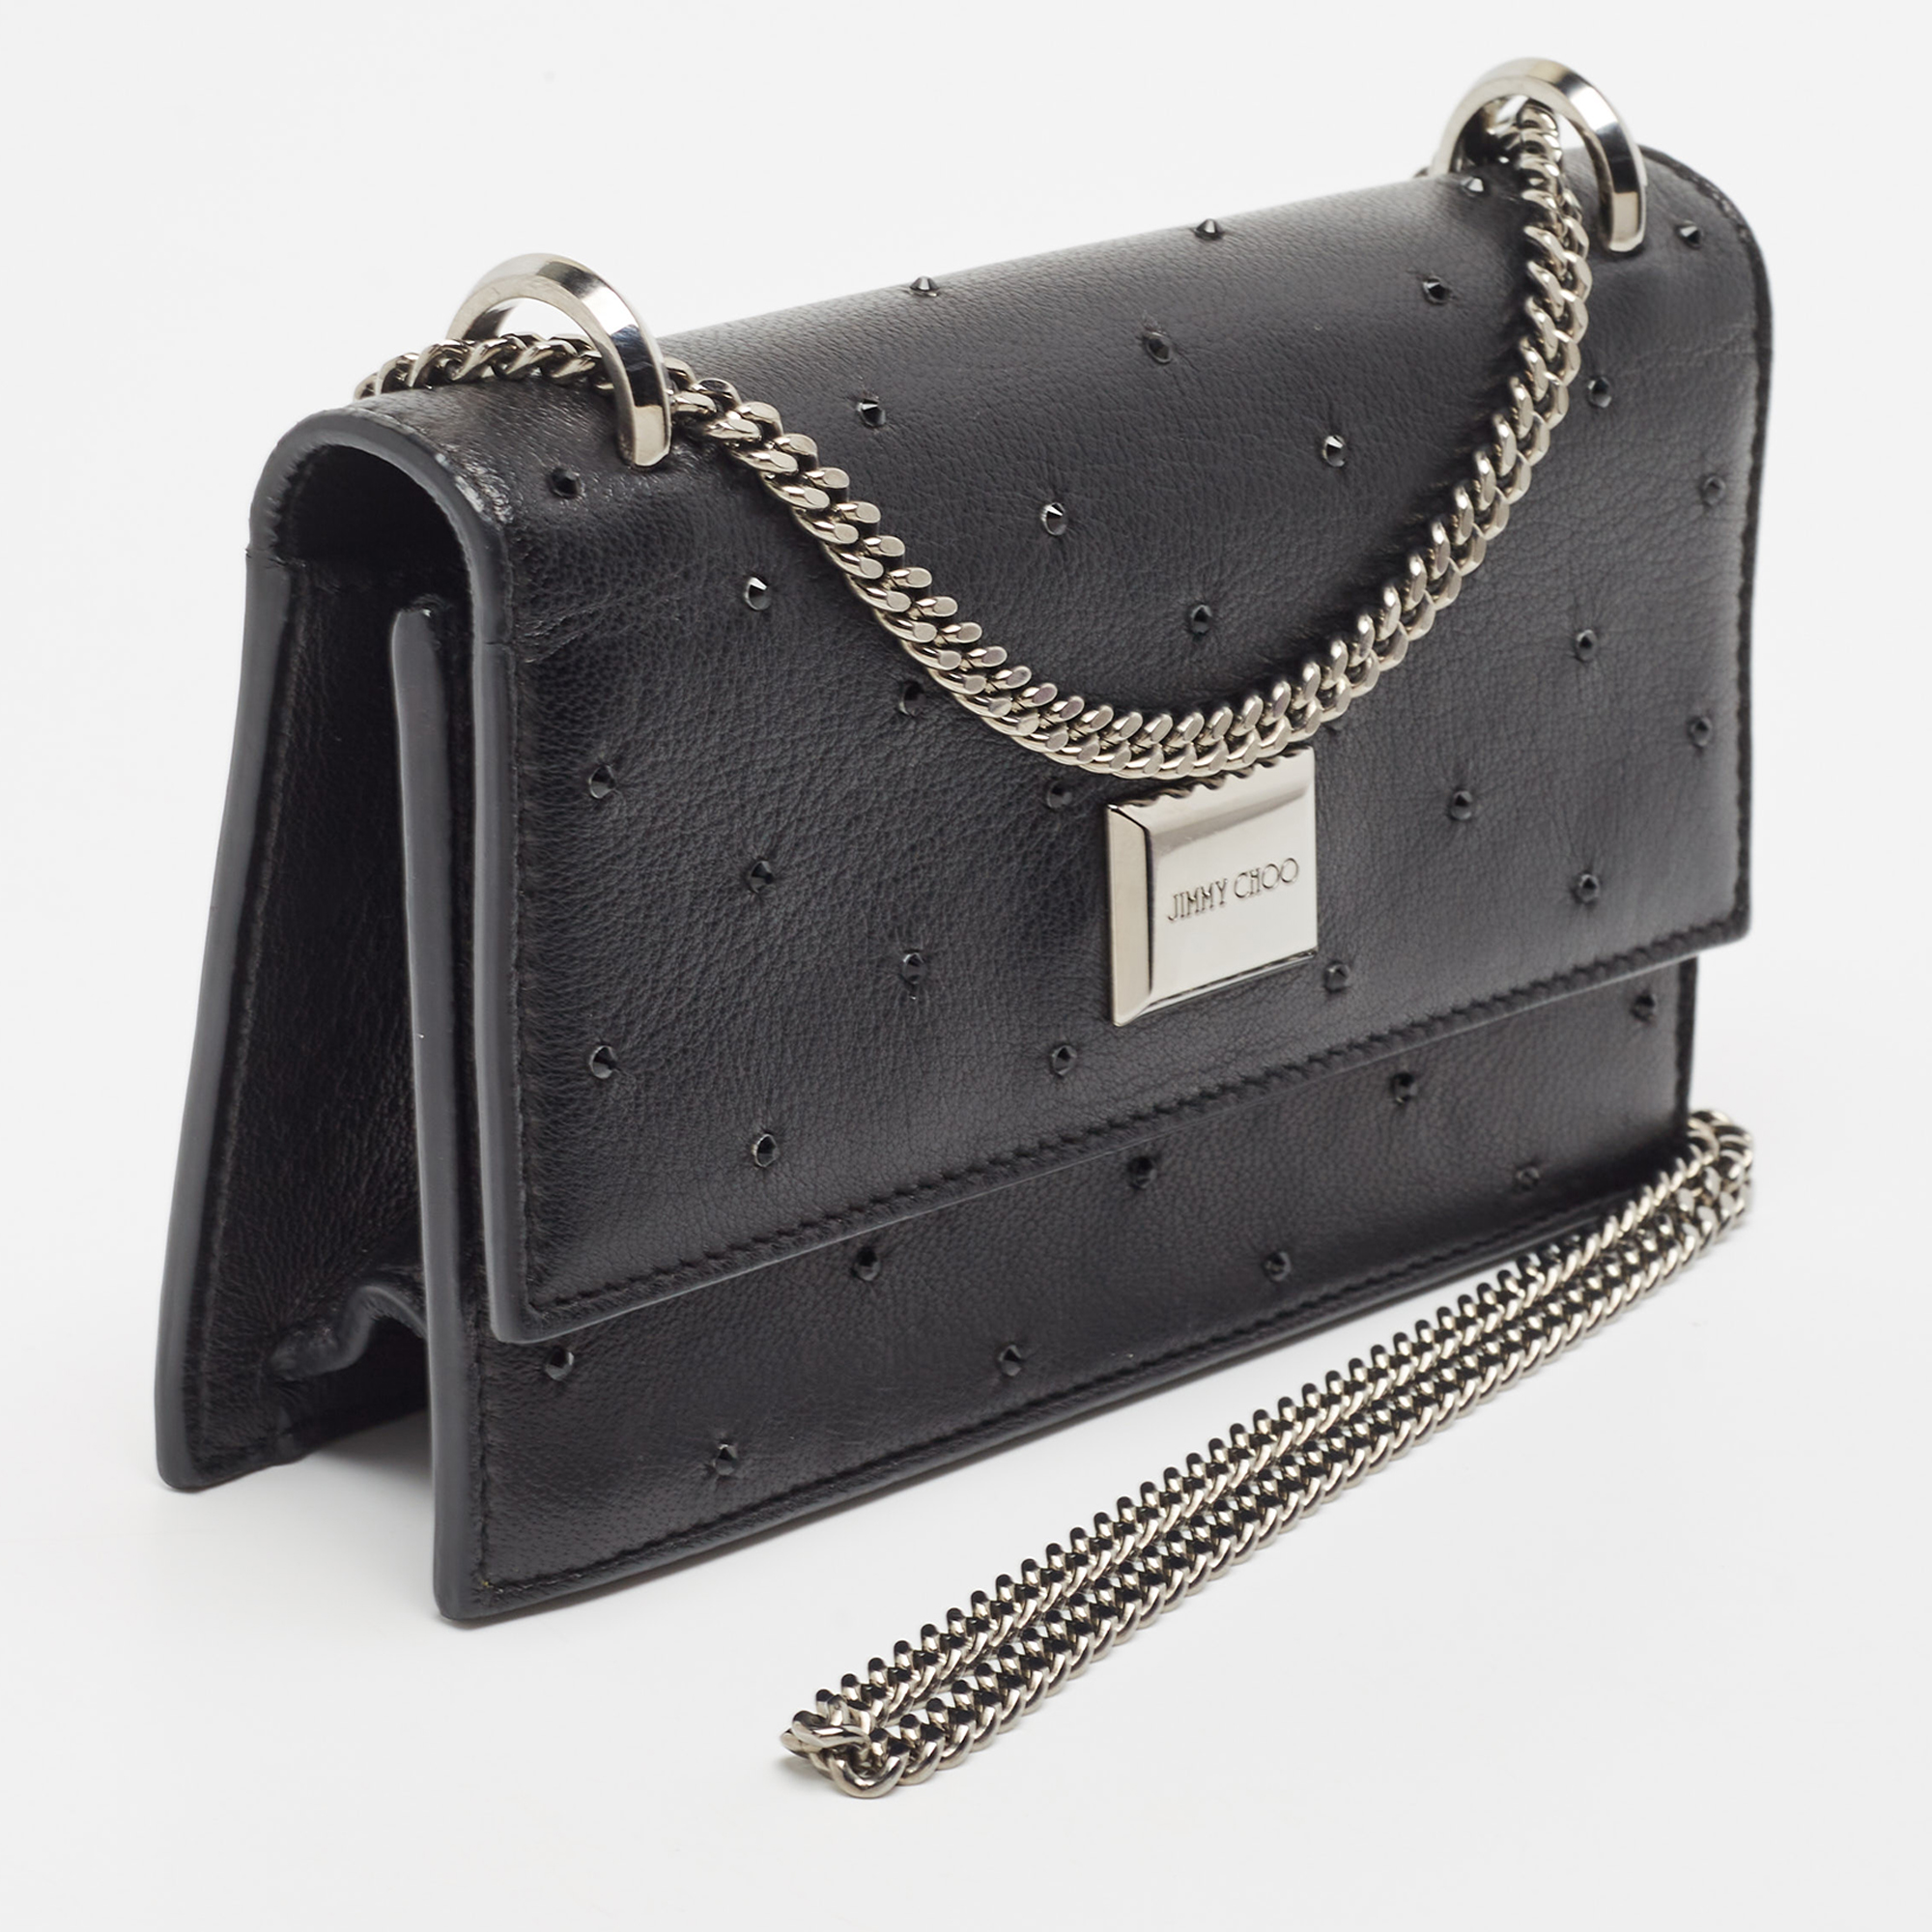 Jimmy Choo Black Leather Crystal Embellished Wallet On Chain